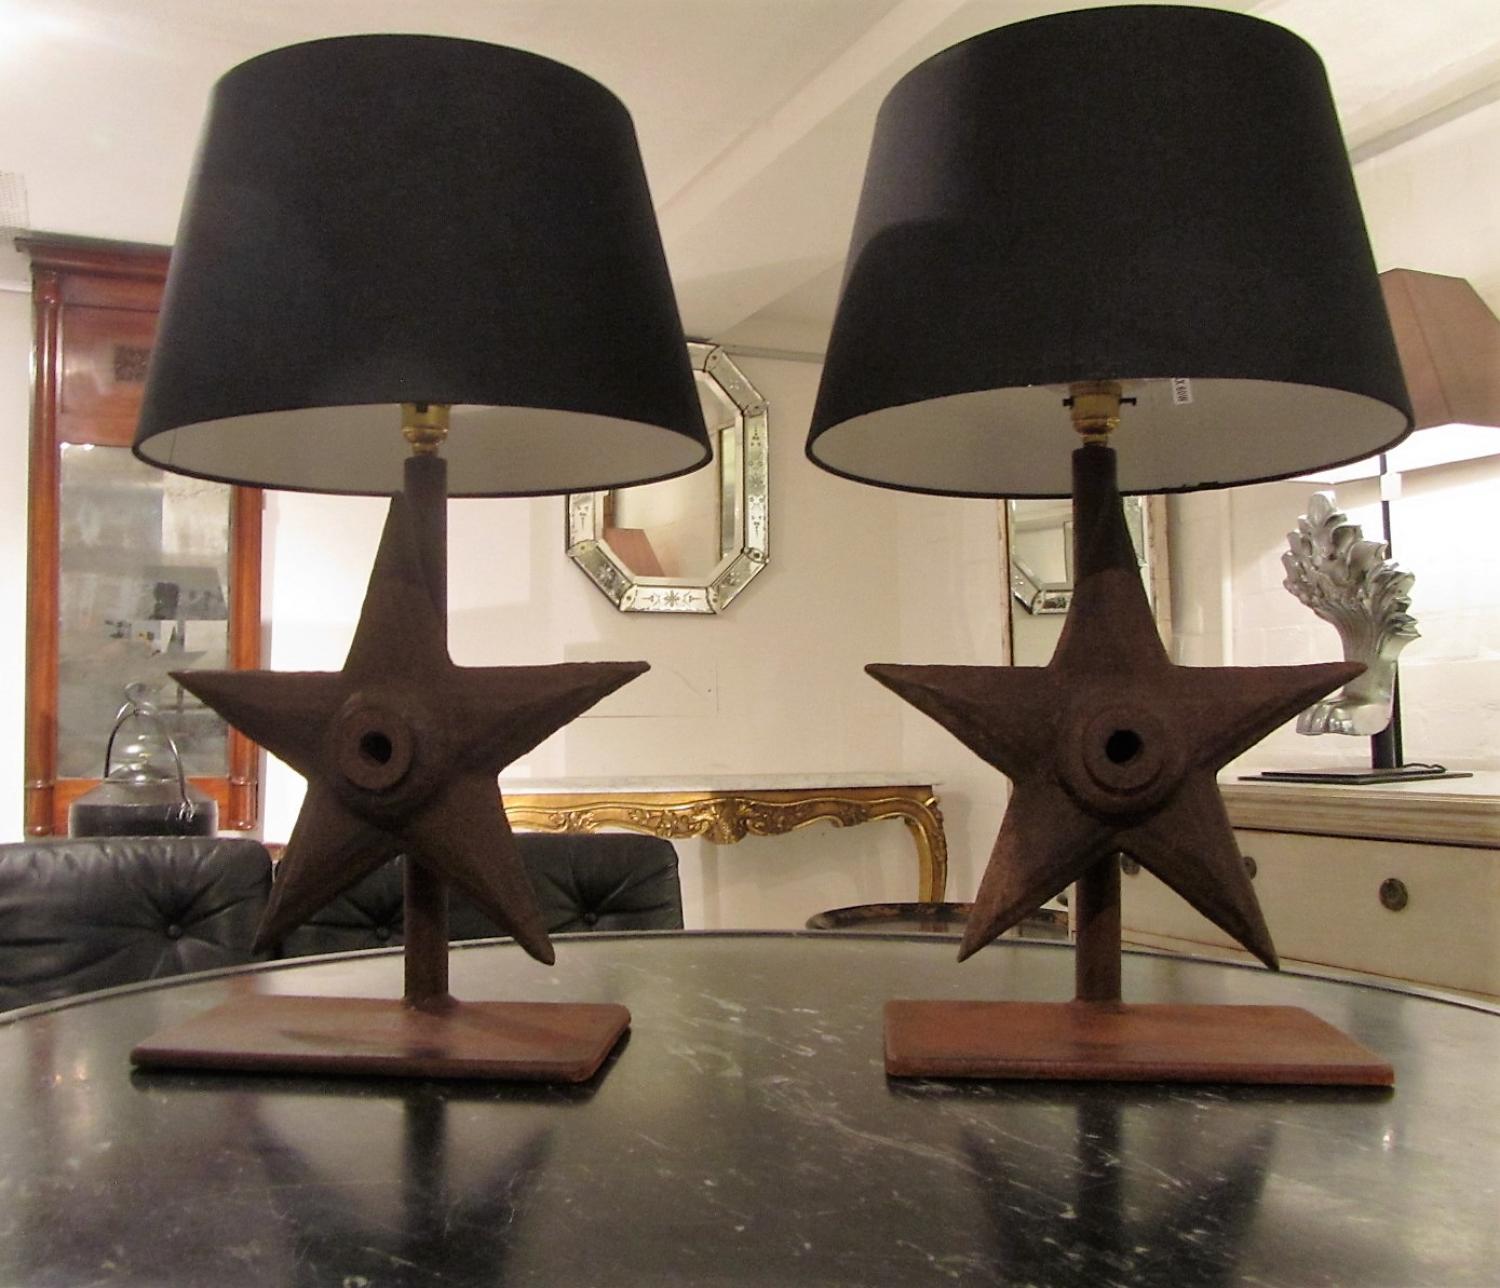 A pair of iron table lamps